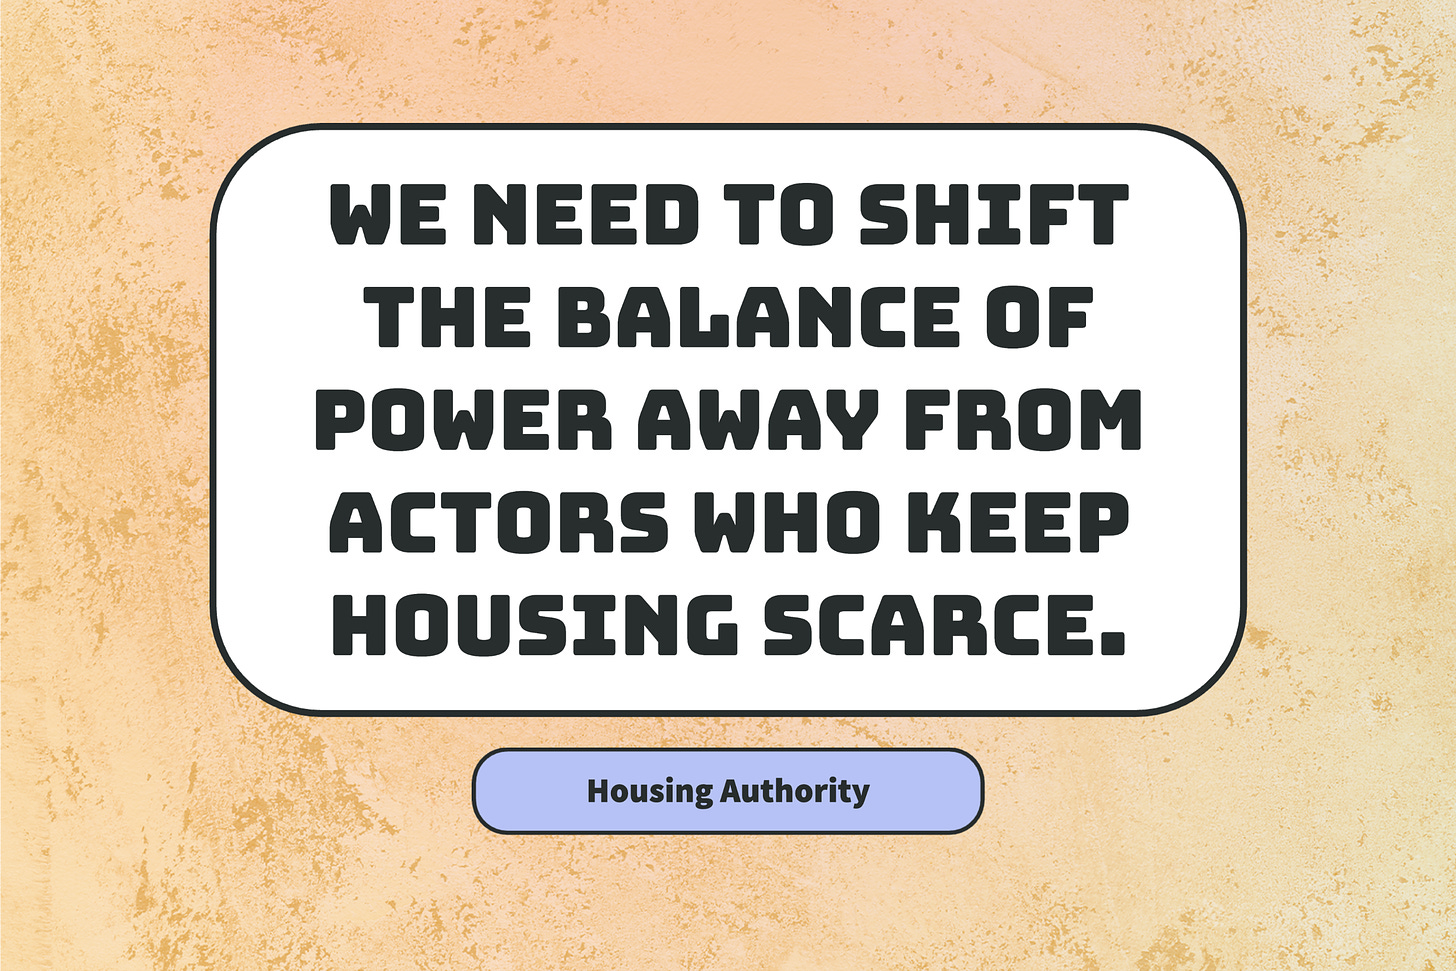 Housing Authority: We need to shift the balance of power away from actors who keep housing scarce.